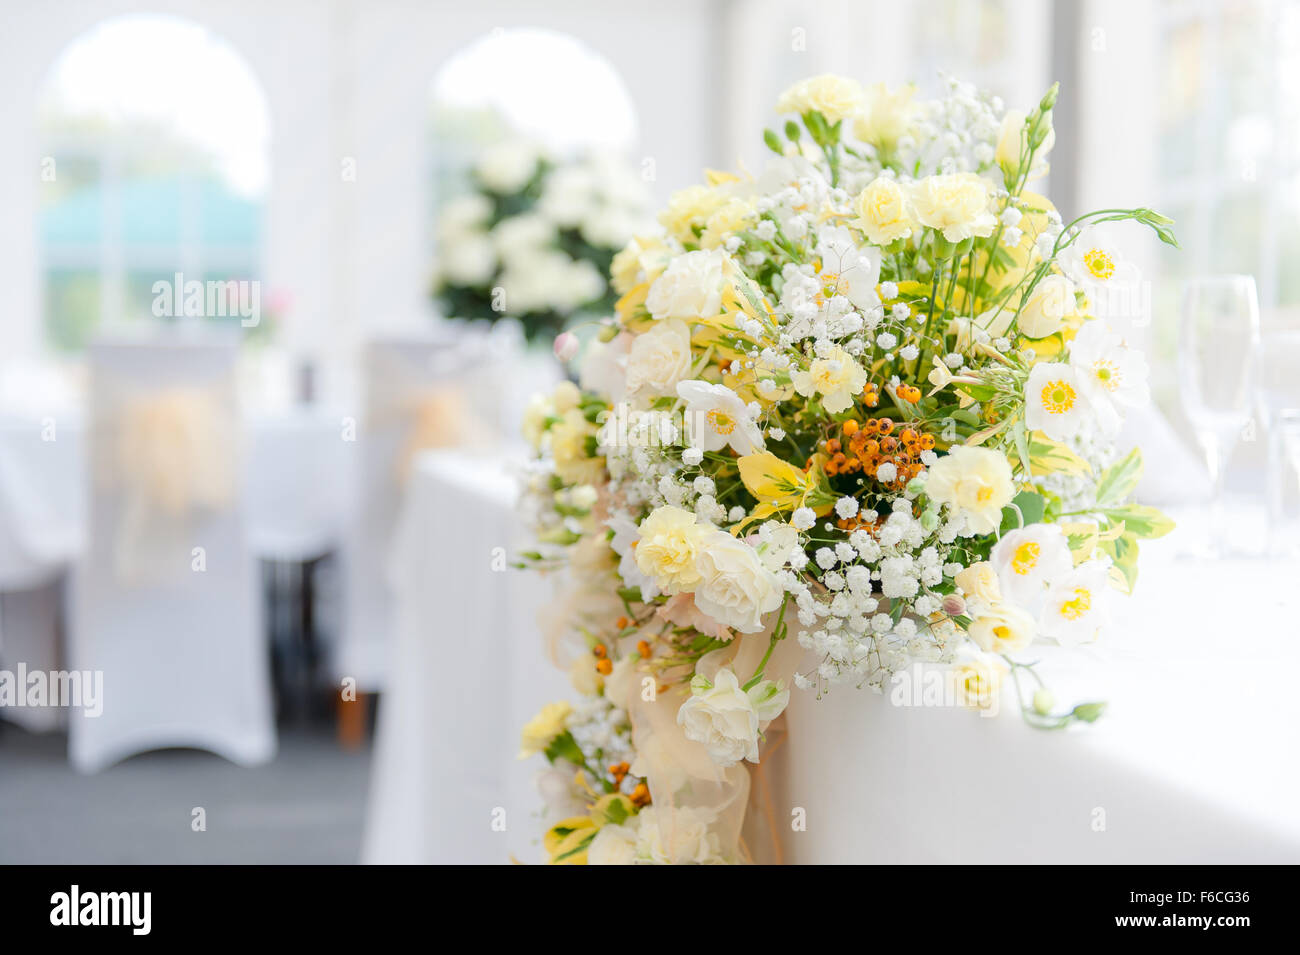 wedding flowers on top table with low depth of field Stock Photo